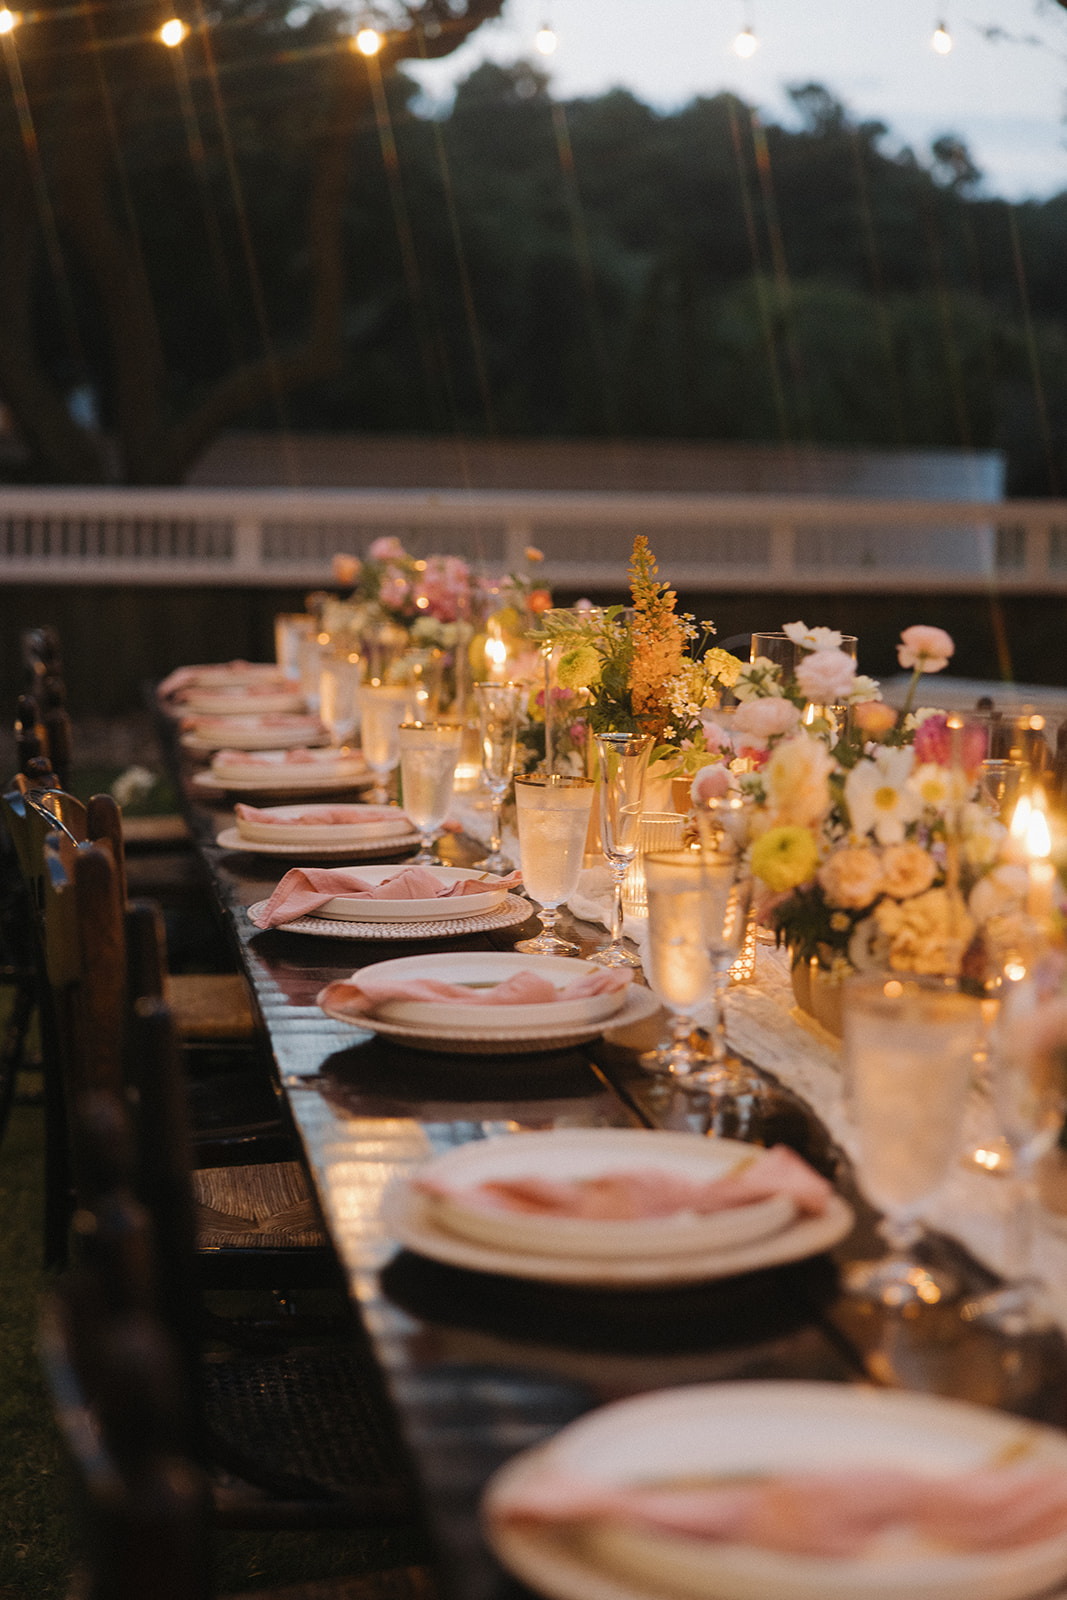 floral decor on long table with lights at backyard wedding reception